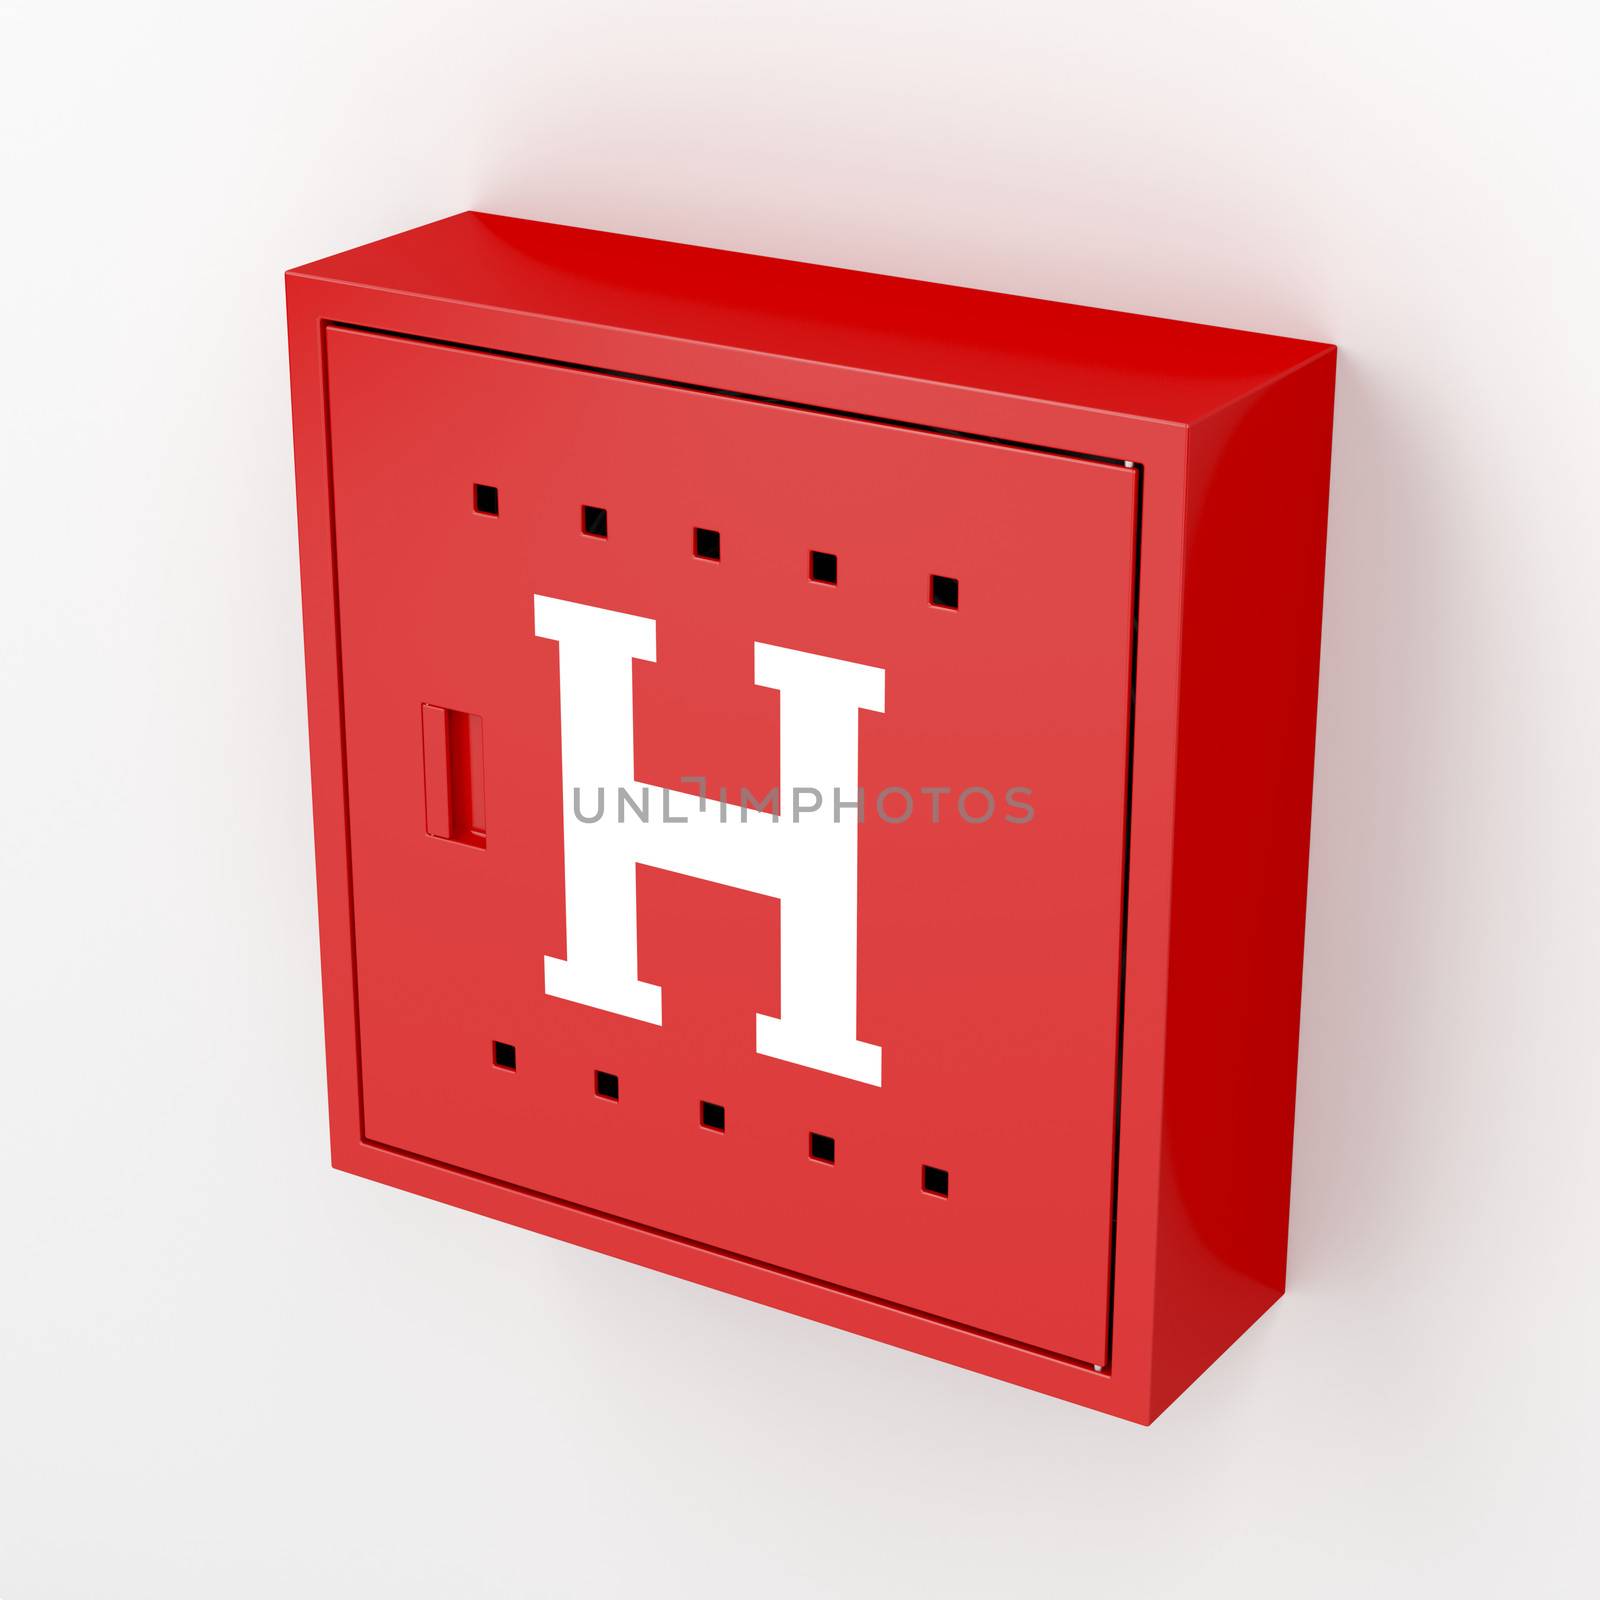 Hydrant cabinet on white background